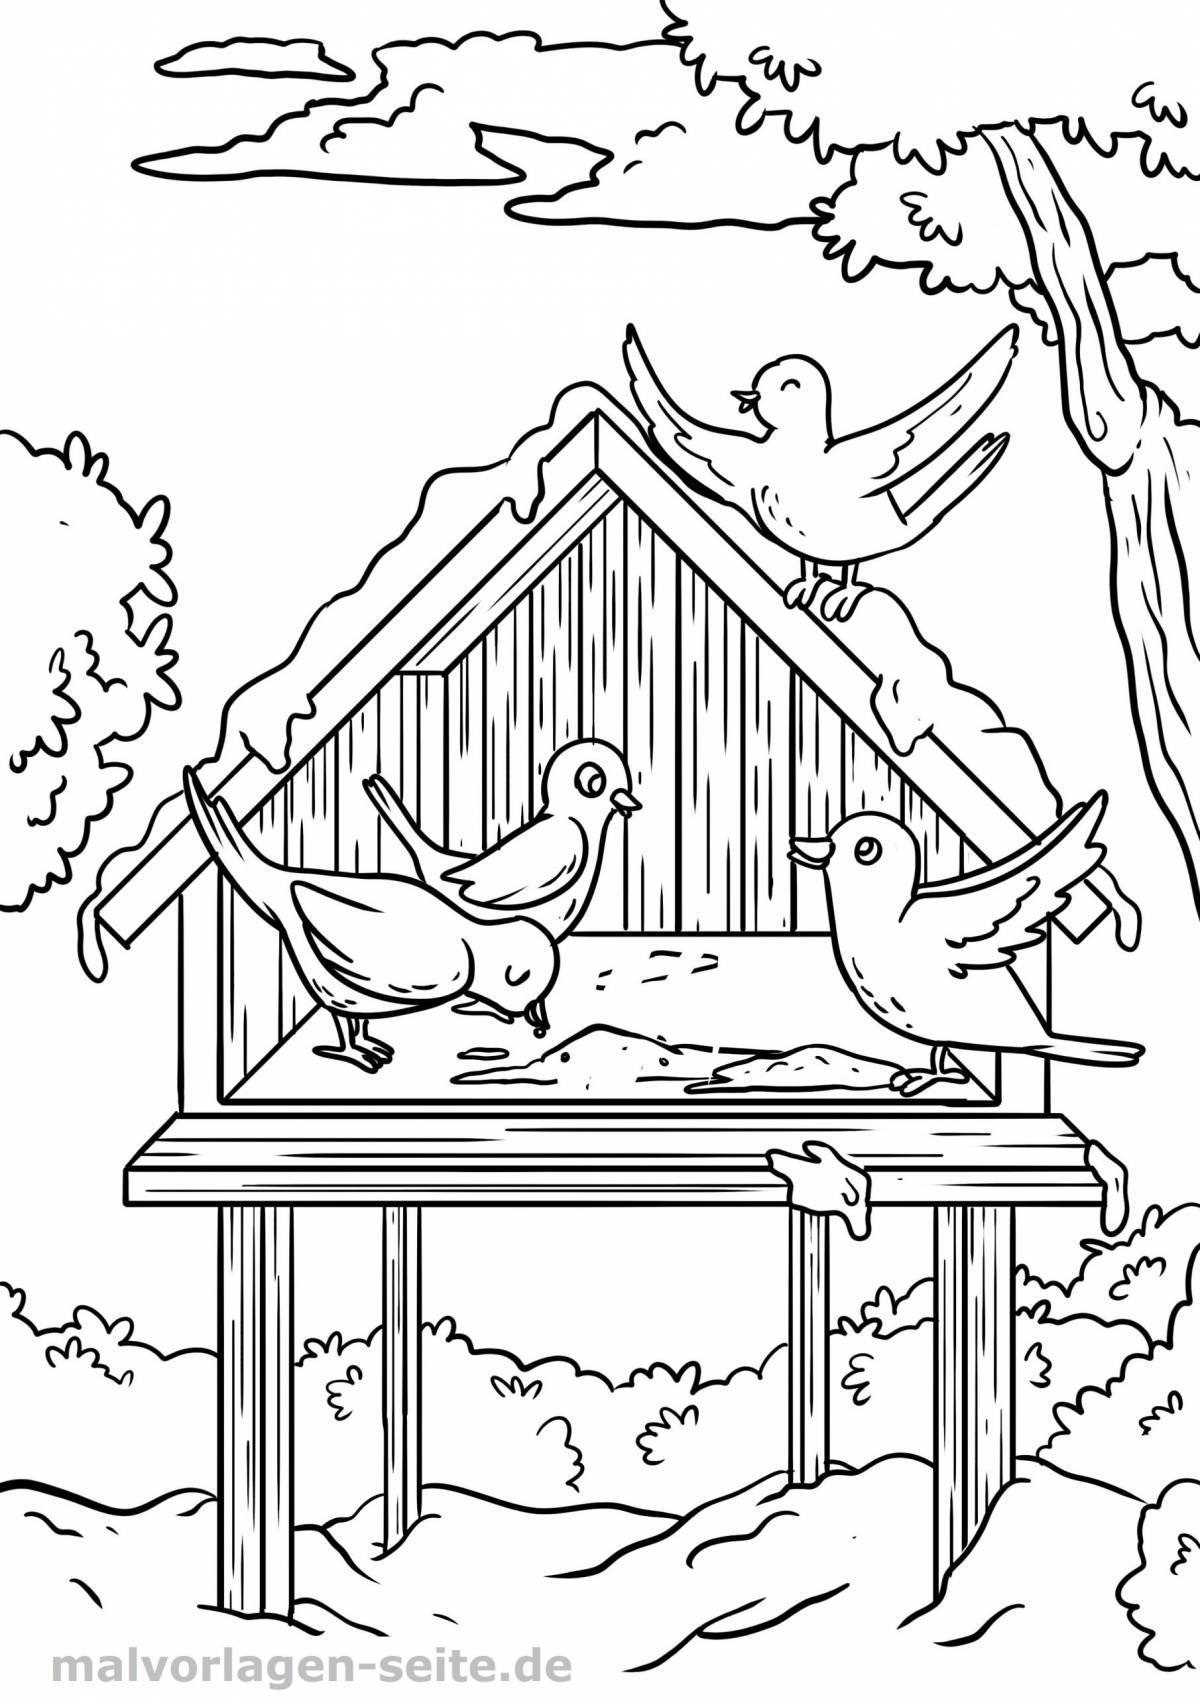 Large bird feeder coloring page